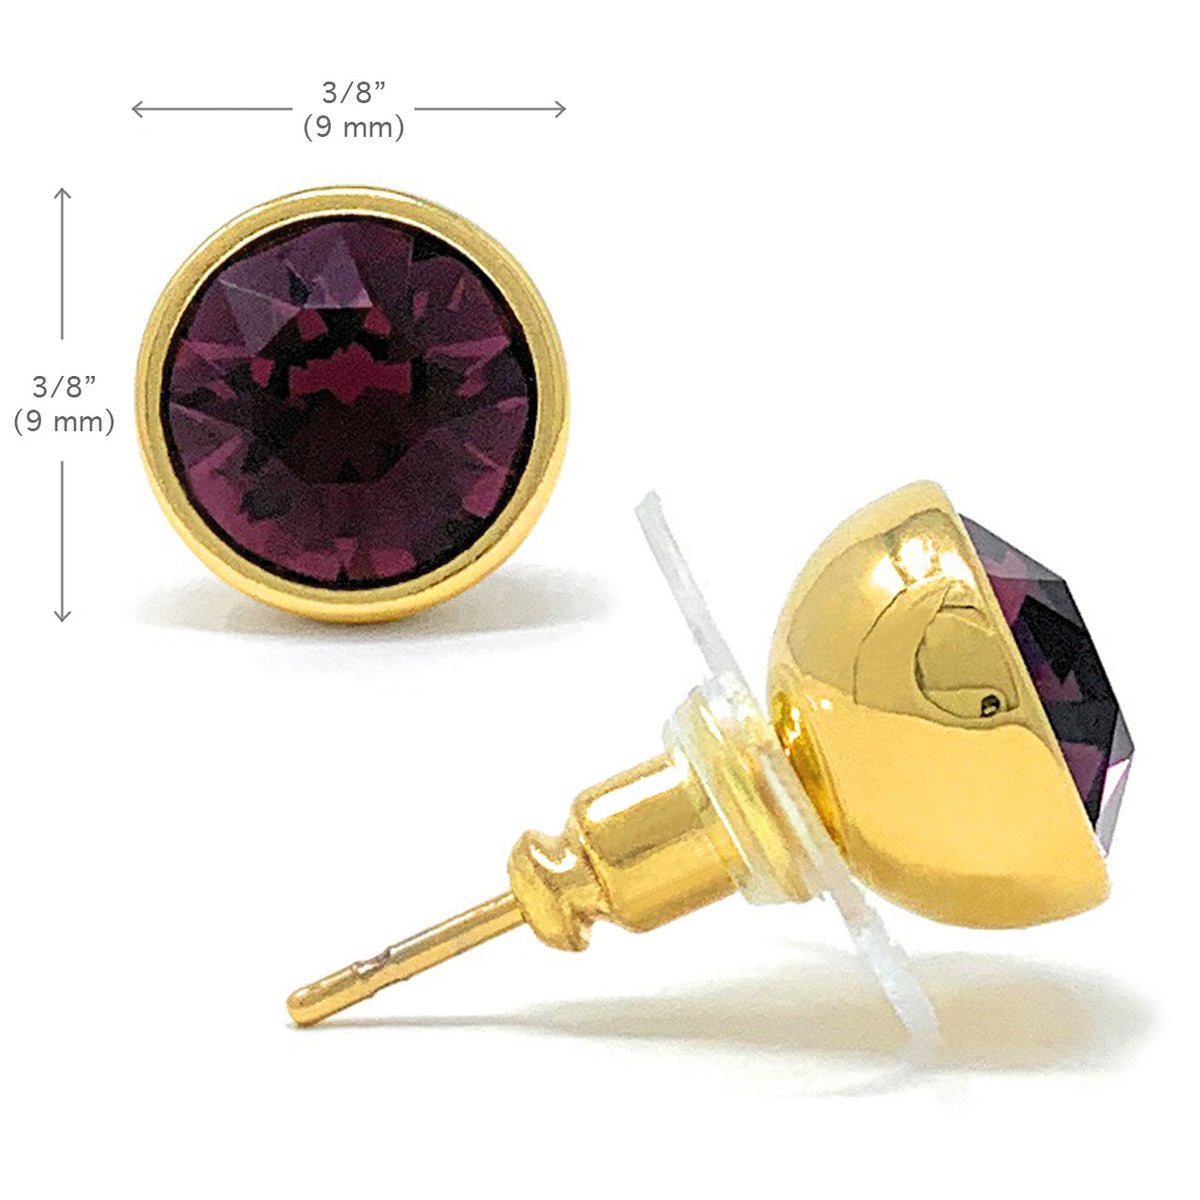 Harley Stud Earrings with Purple Amethyst Round Crystals from Swarovski Gold Plated - Ed Heart